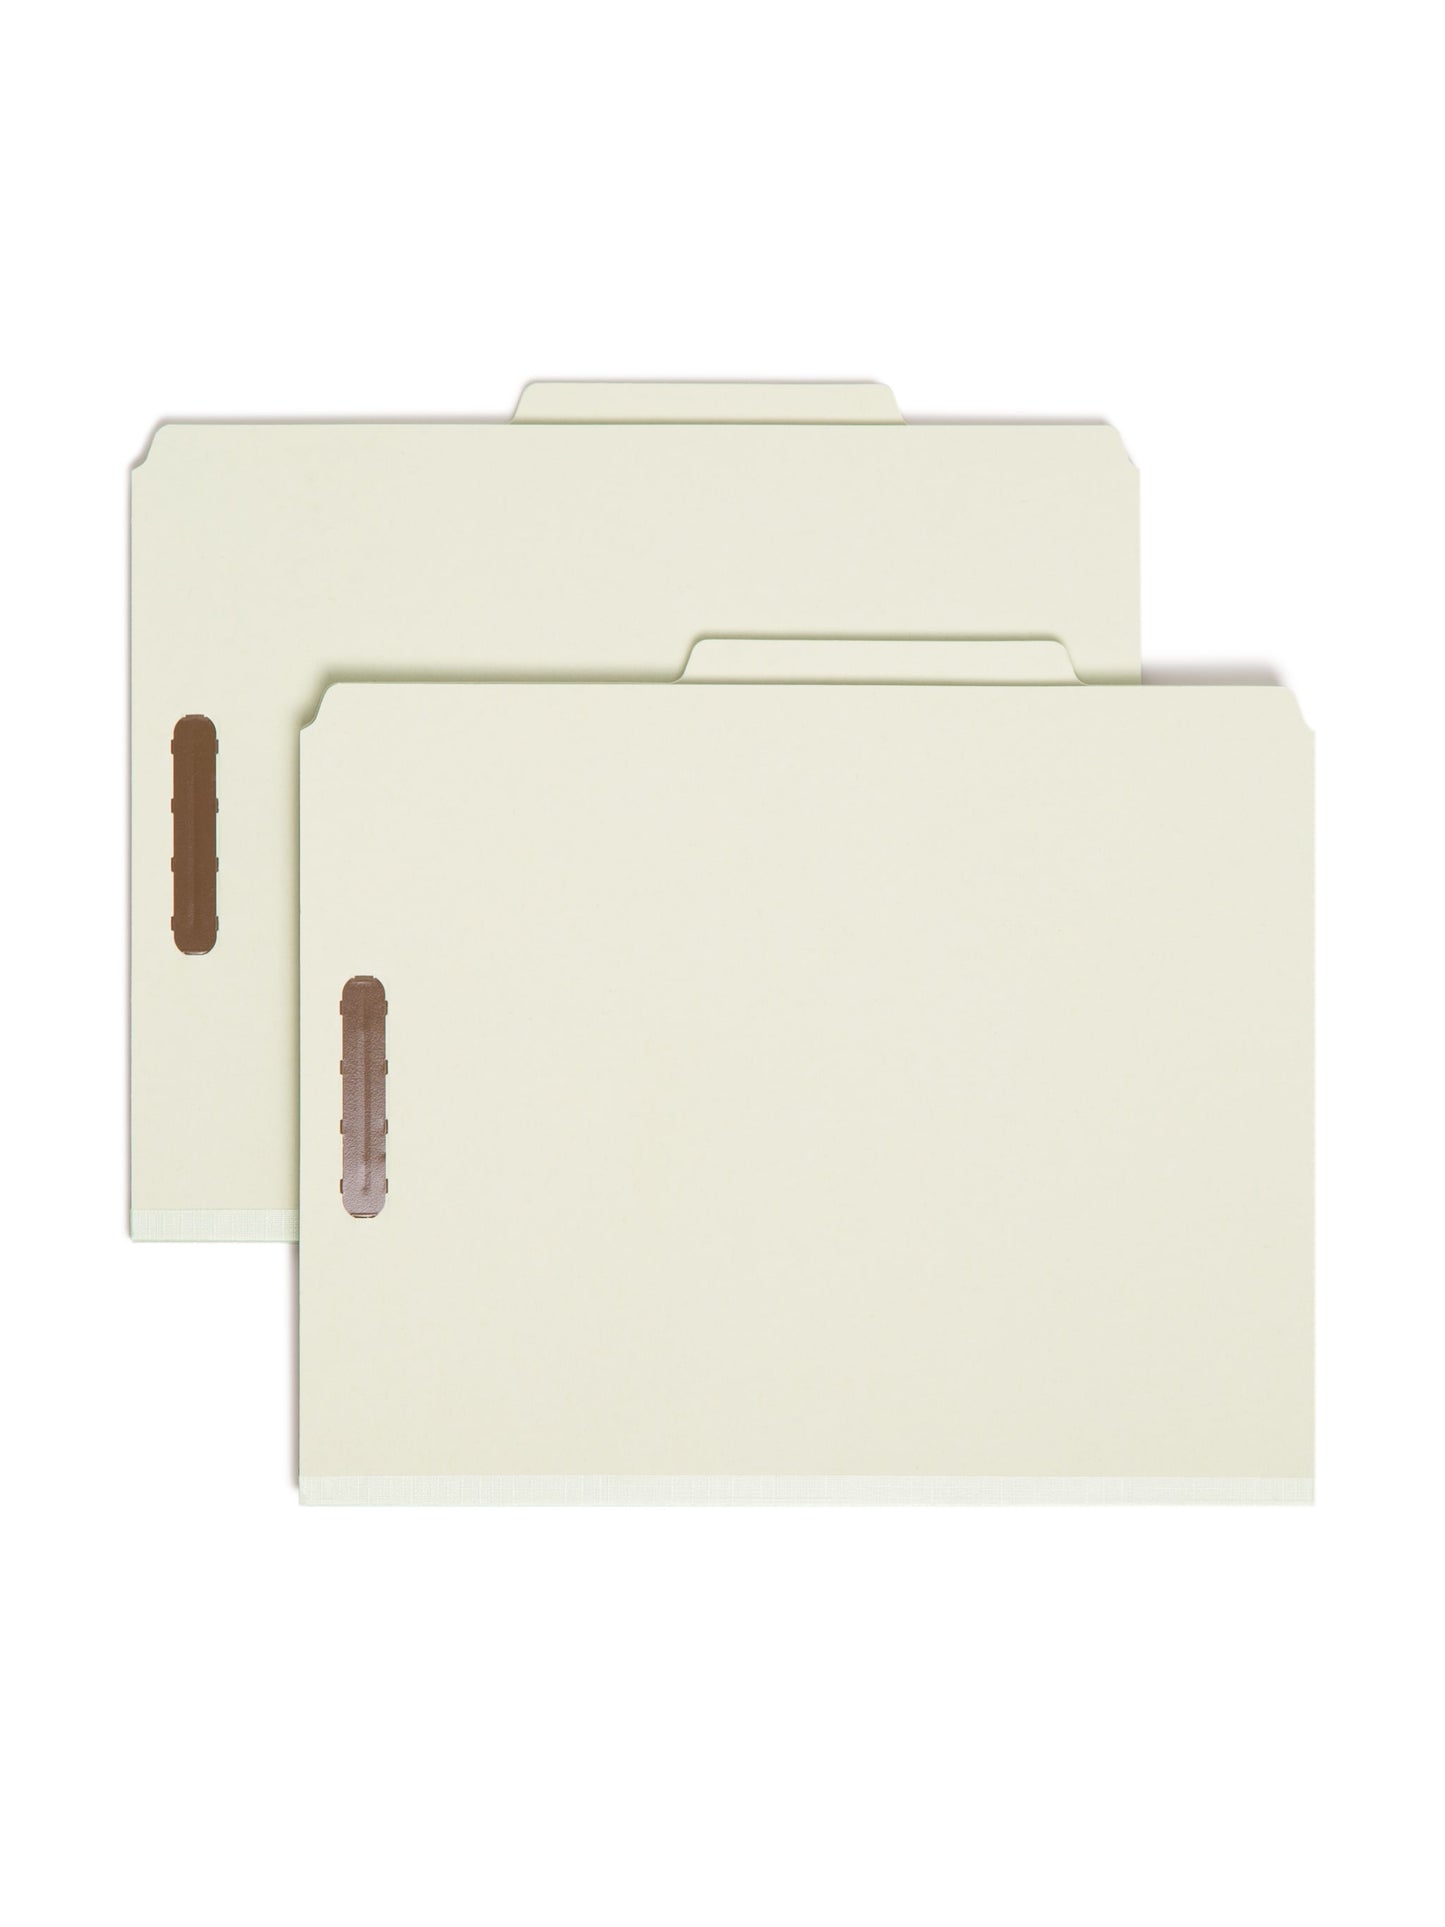 Pressboard Classification File Folders, 3 Dividers, 3 inch Expansion, Gray/Green Color, Letter Size, Set of 0, 30086486140936